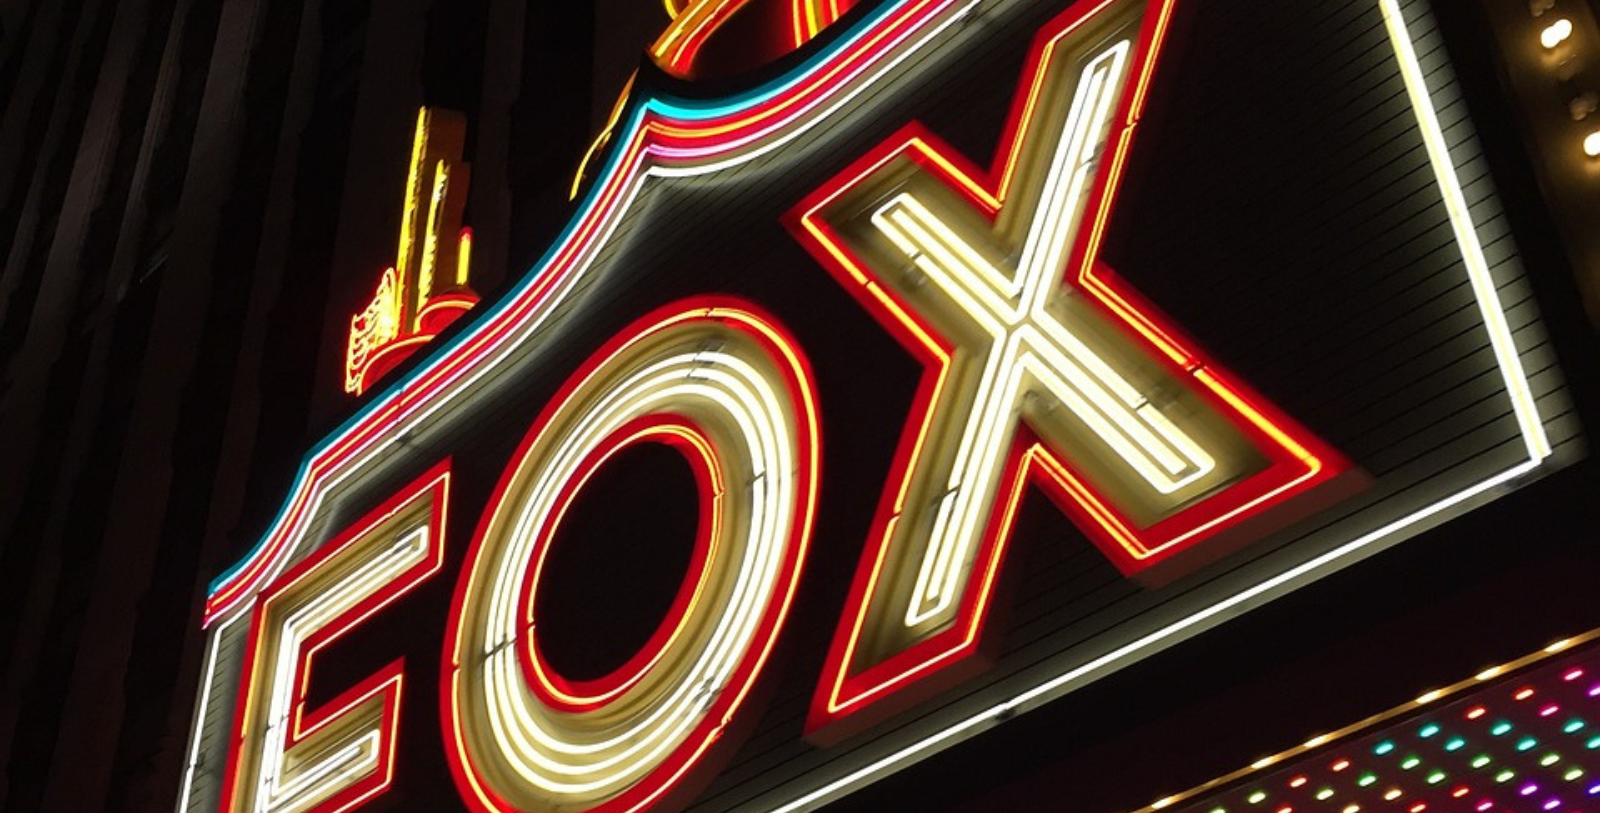 Experience the historic Fox Theatre performing arts center located in Downtown Detroit. The Fox Theatre is an iconic theatre and music venue that is well known around the world.